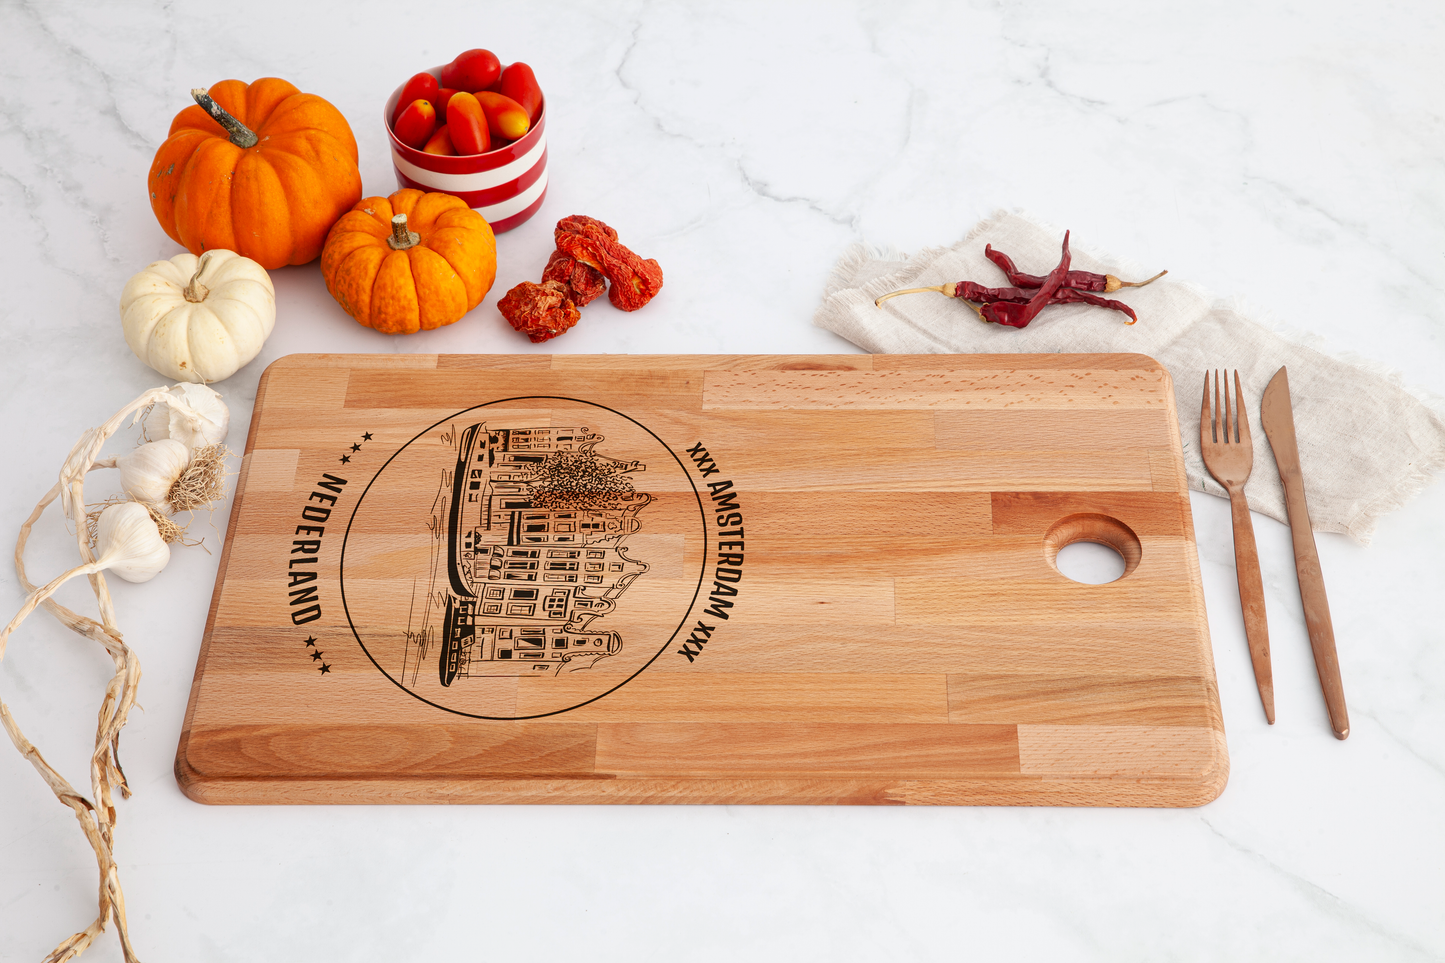 Amsterdam, Houses, cutting board, with knife